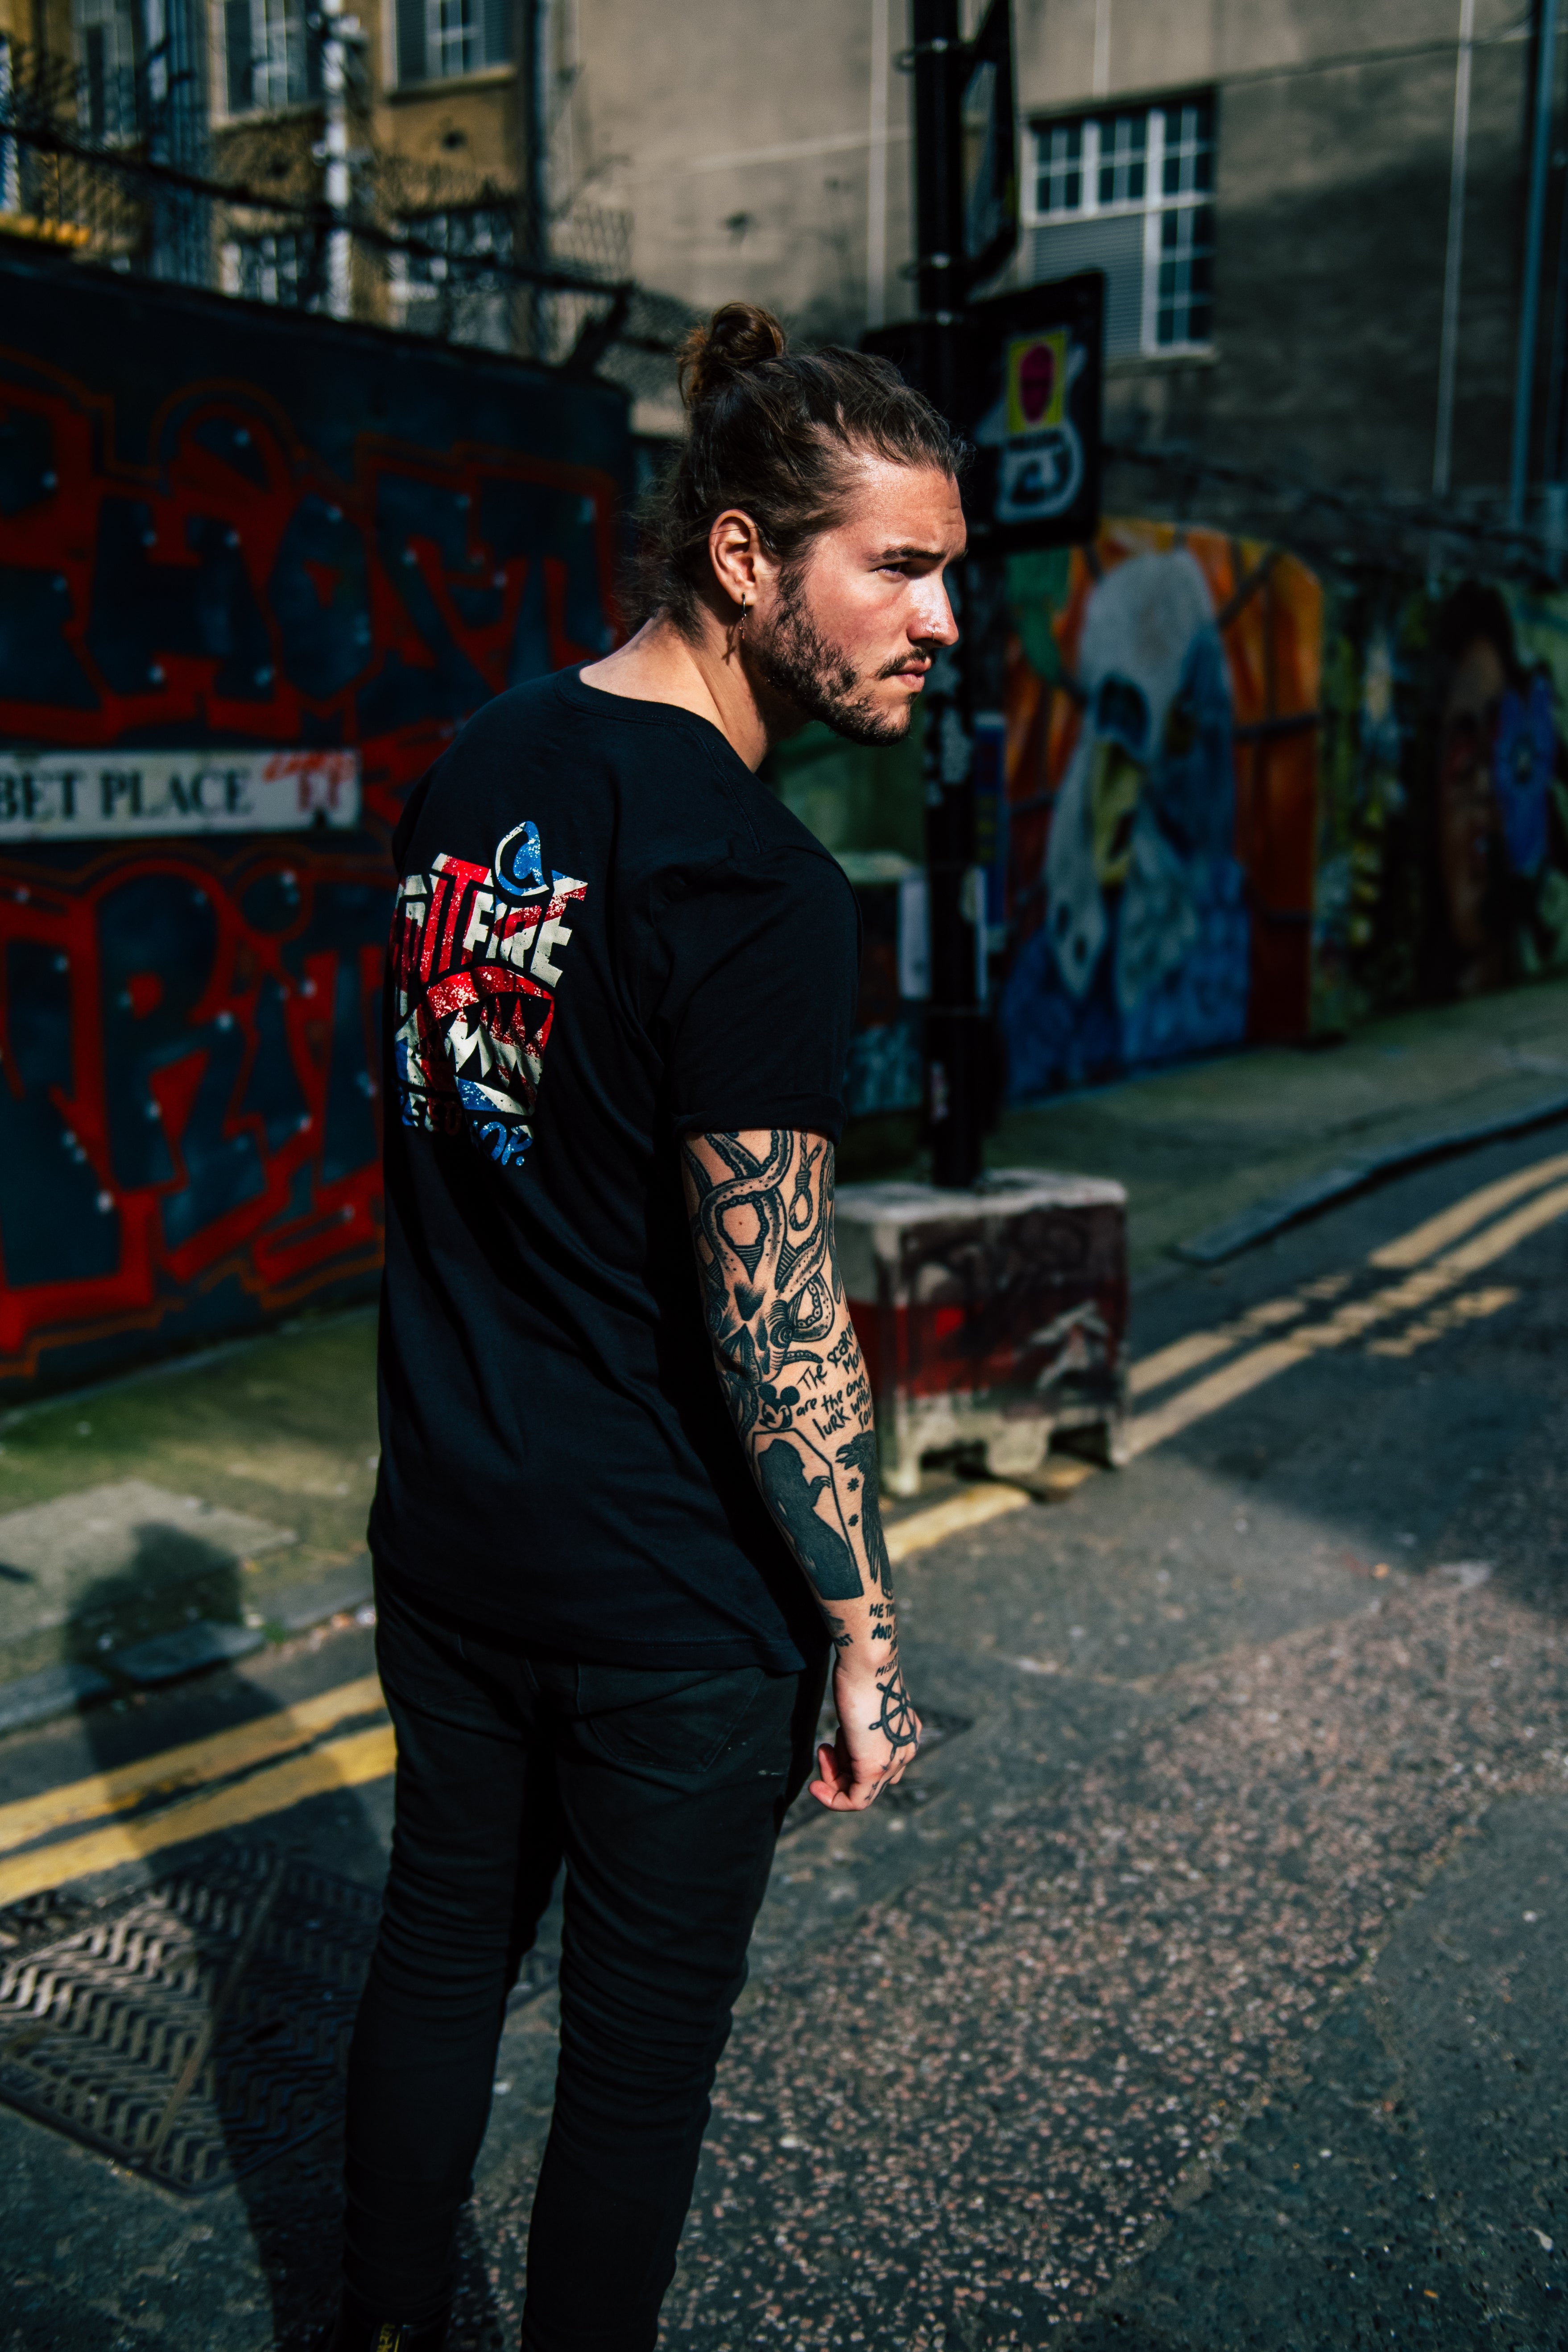 Spitfire Patriot Edition Tee With Union Jack Logo